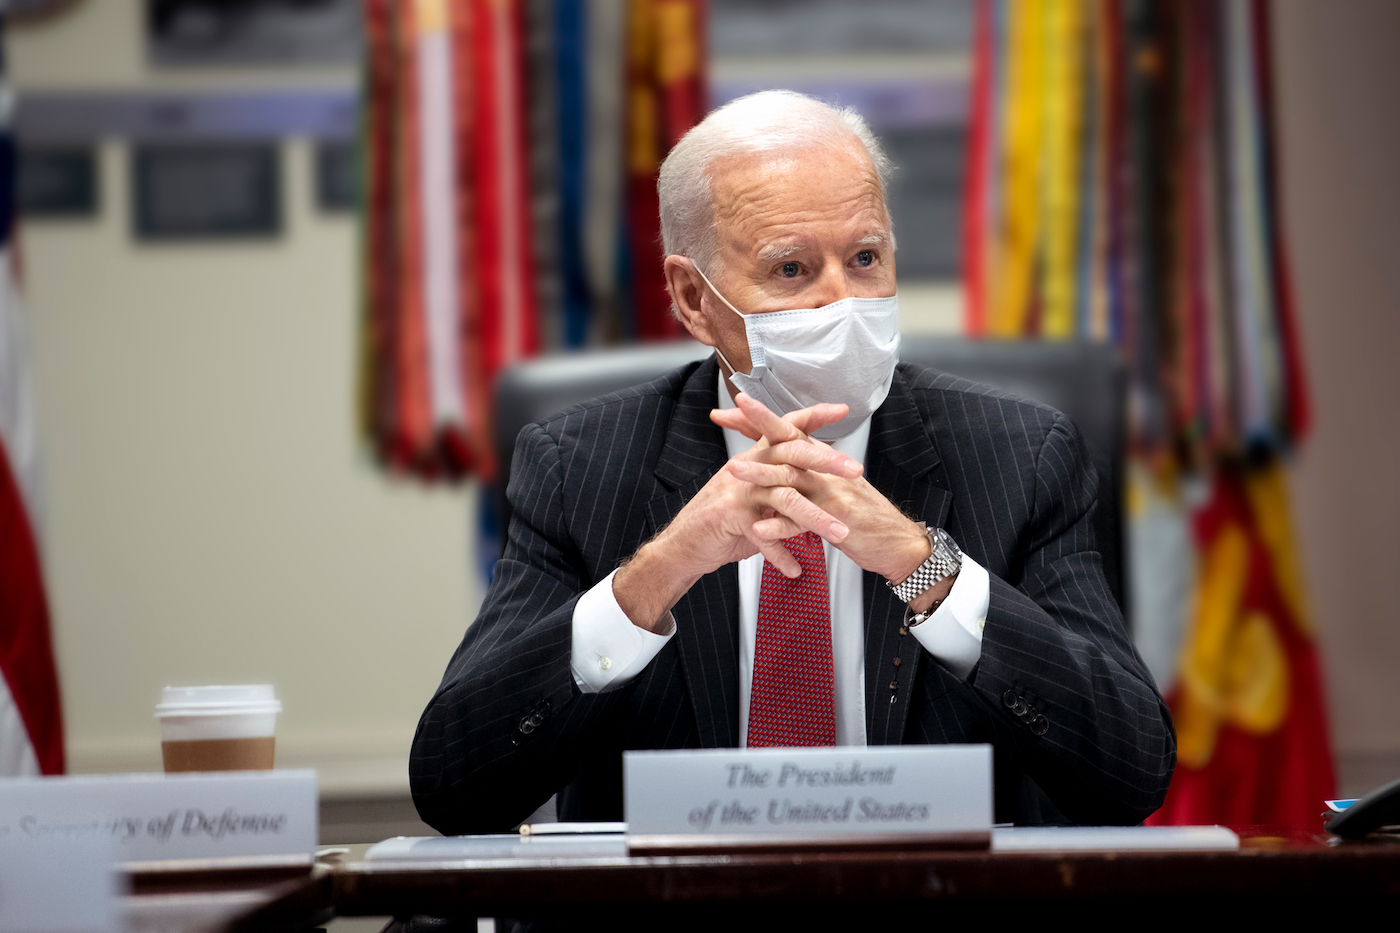 Joe Biden with a face mask on sitting at a desk with his hands folded in front of him. A placard in the foreground reads "The President of the United States"